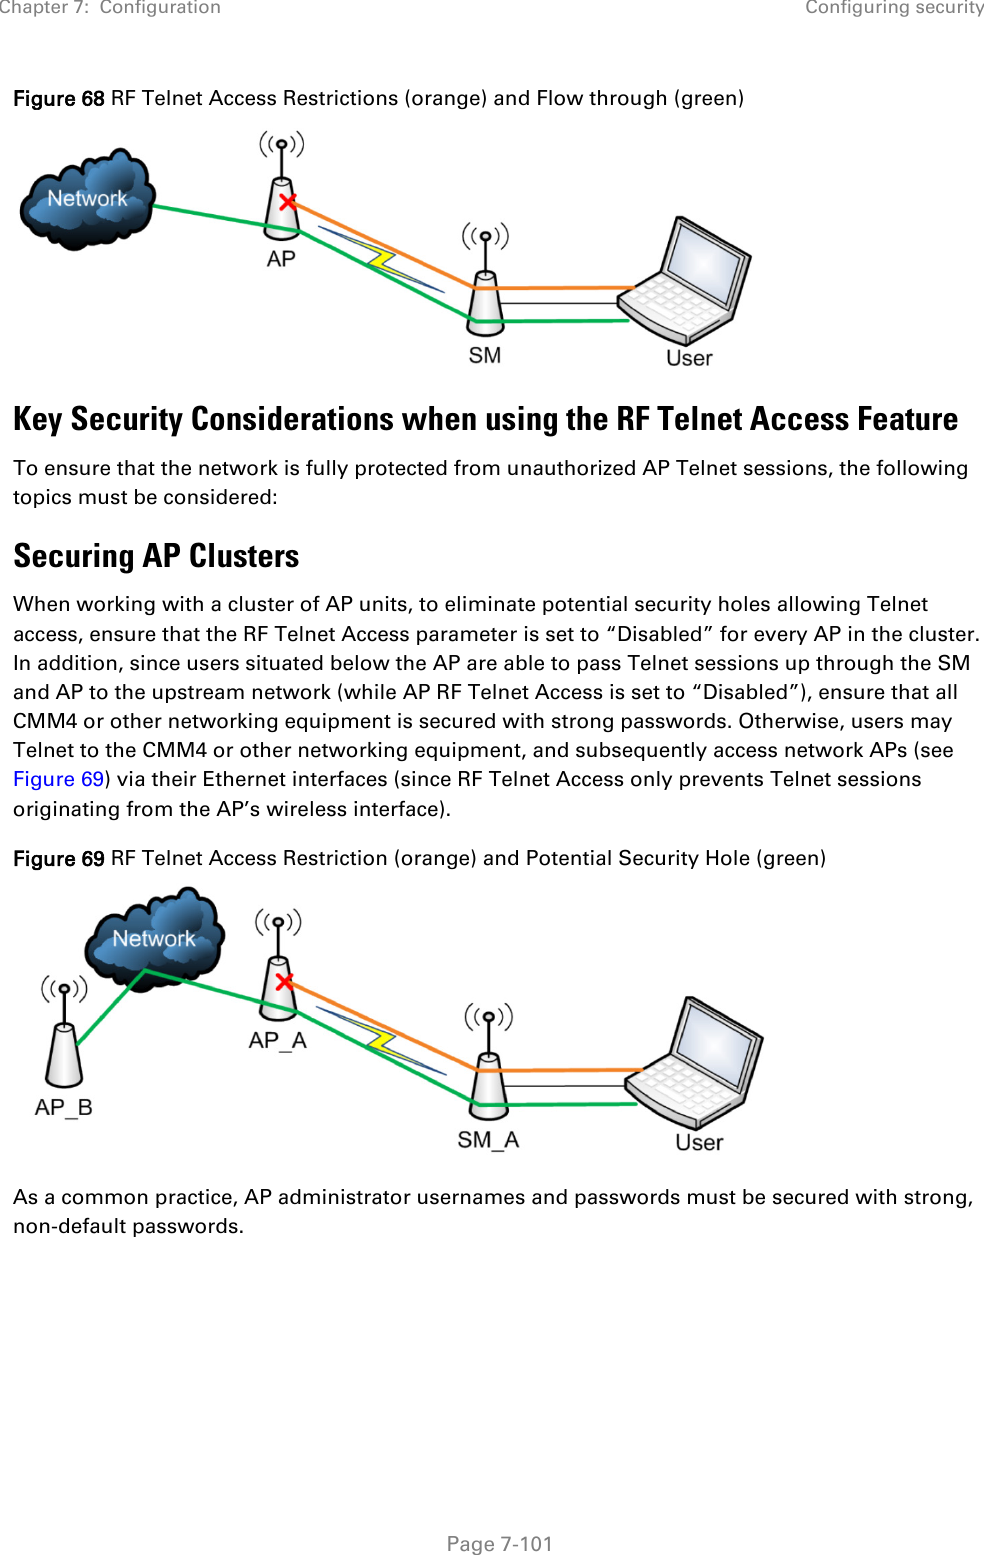 Chapter 7:  Configuration Configuring security   Page 7-101 Figure 68 RF Telnet Access Restrictions (orange) and Flow through (green)  Key Security Considerations when using the RF Telnet Access Feature To ensure that the network is fully protected from unauthorized AP Telnet sessions, the following topics must be considered: Securing AP Clusters When working with a cluster of AP units, to eliminate potential security holes allowing Telnet access, ensure that the RF Telnet Access parameter is set to “Disabled” for every AP in the cluster.  In addition, since users situated below the AP are able to pass Telnet sessions up through the SM and AP to the upstream network (while AP RF Telnet Access is set to “Disabled”), ensure that all CMM4 or other networking equipment is secured with strong passwords. Otherwise, users may Telnet to the CMM4 or other networking equipment, and subsequently access network APs (see Figure 69) via their Ethernet interfaces (since RF Telnet Access only prevents Telnet sessions originating from the AP’s wireless interface). Figure 69 RF Telnet Access Restriction (orange) and Potential Security Hole (green)  As a common practice, AP administrator usernames and passwords must be secured with strong, non-default passwords.   